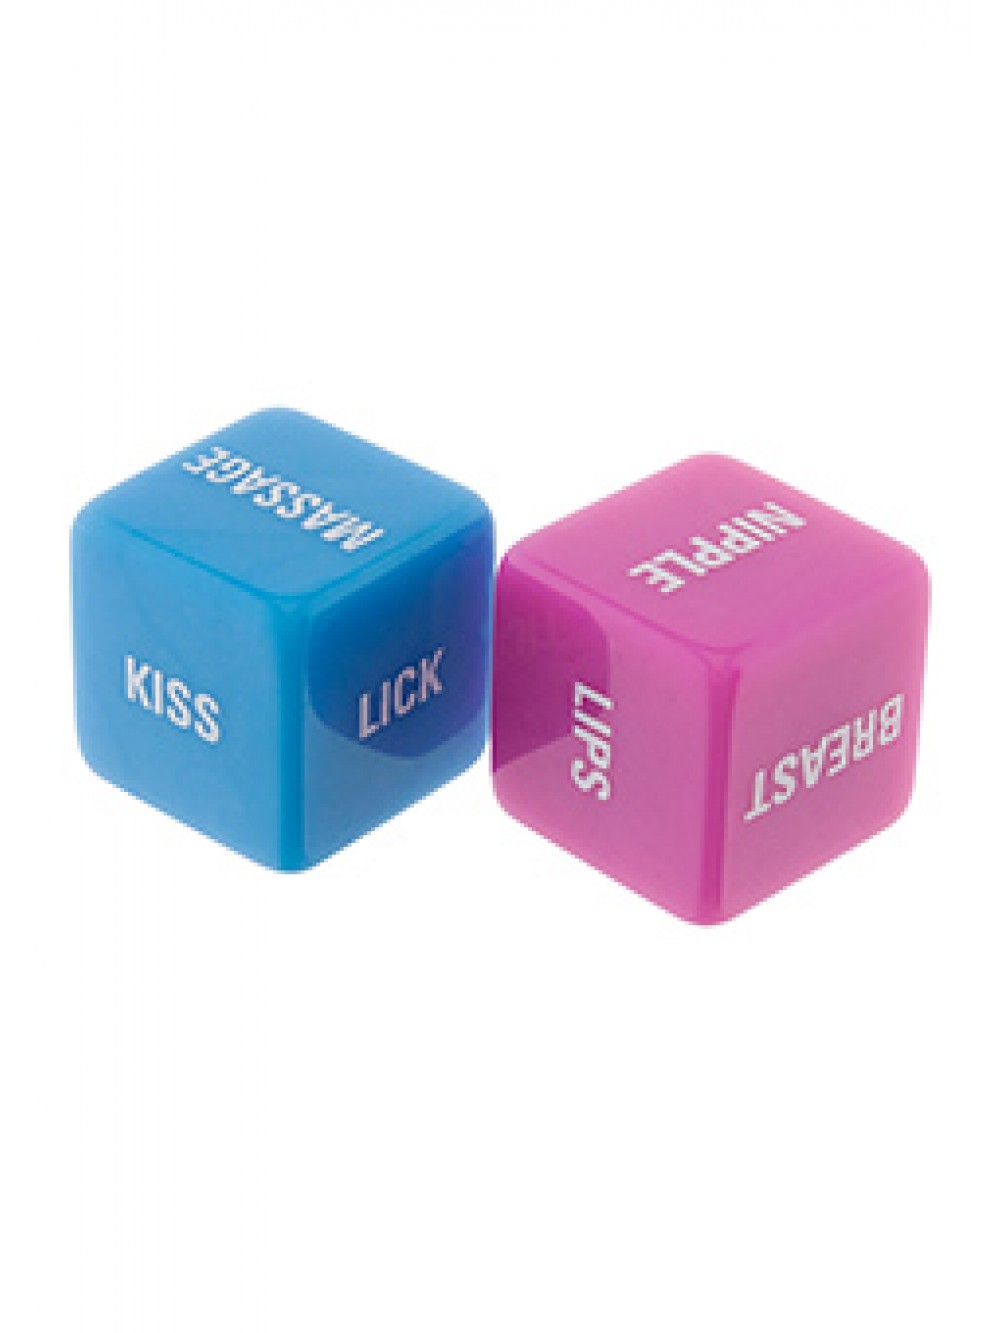 LOVERS DICE PINK/BLUE 8713221450487